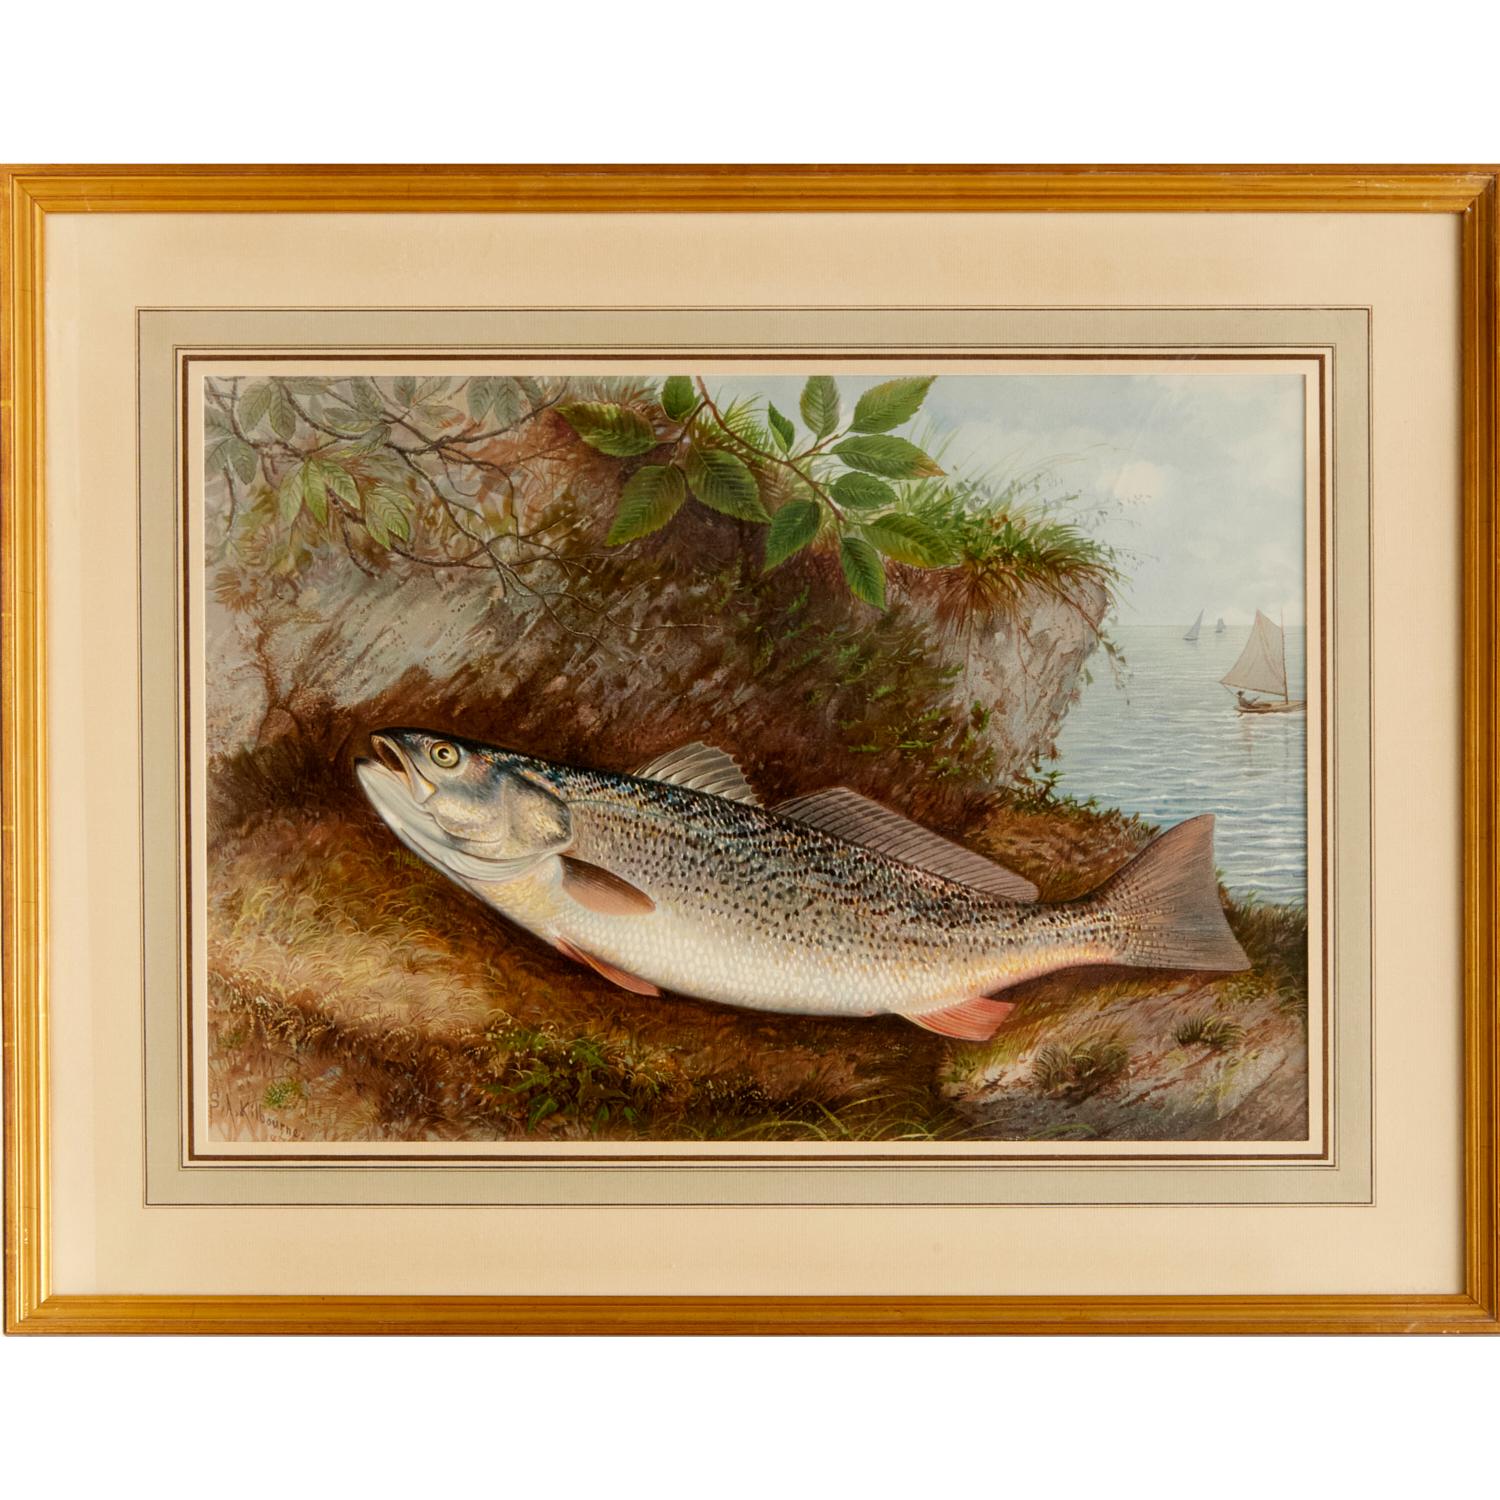 S. A. Kilbourne: „Game Fishes of the United States“, 6 gerahmte Chromolithographien  im Zustand „Gut“ im Angebot in Morristown, NJ